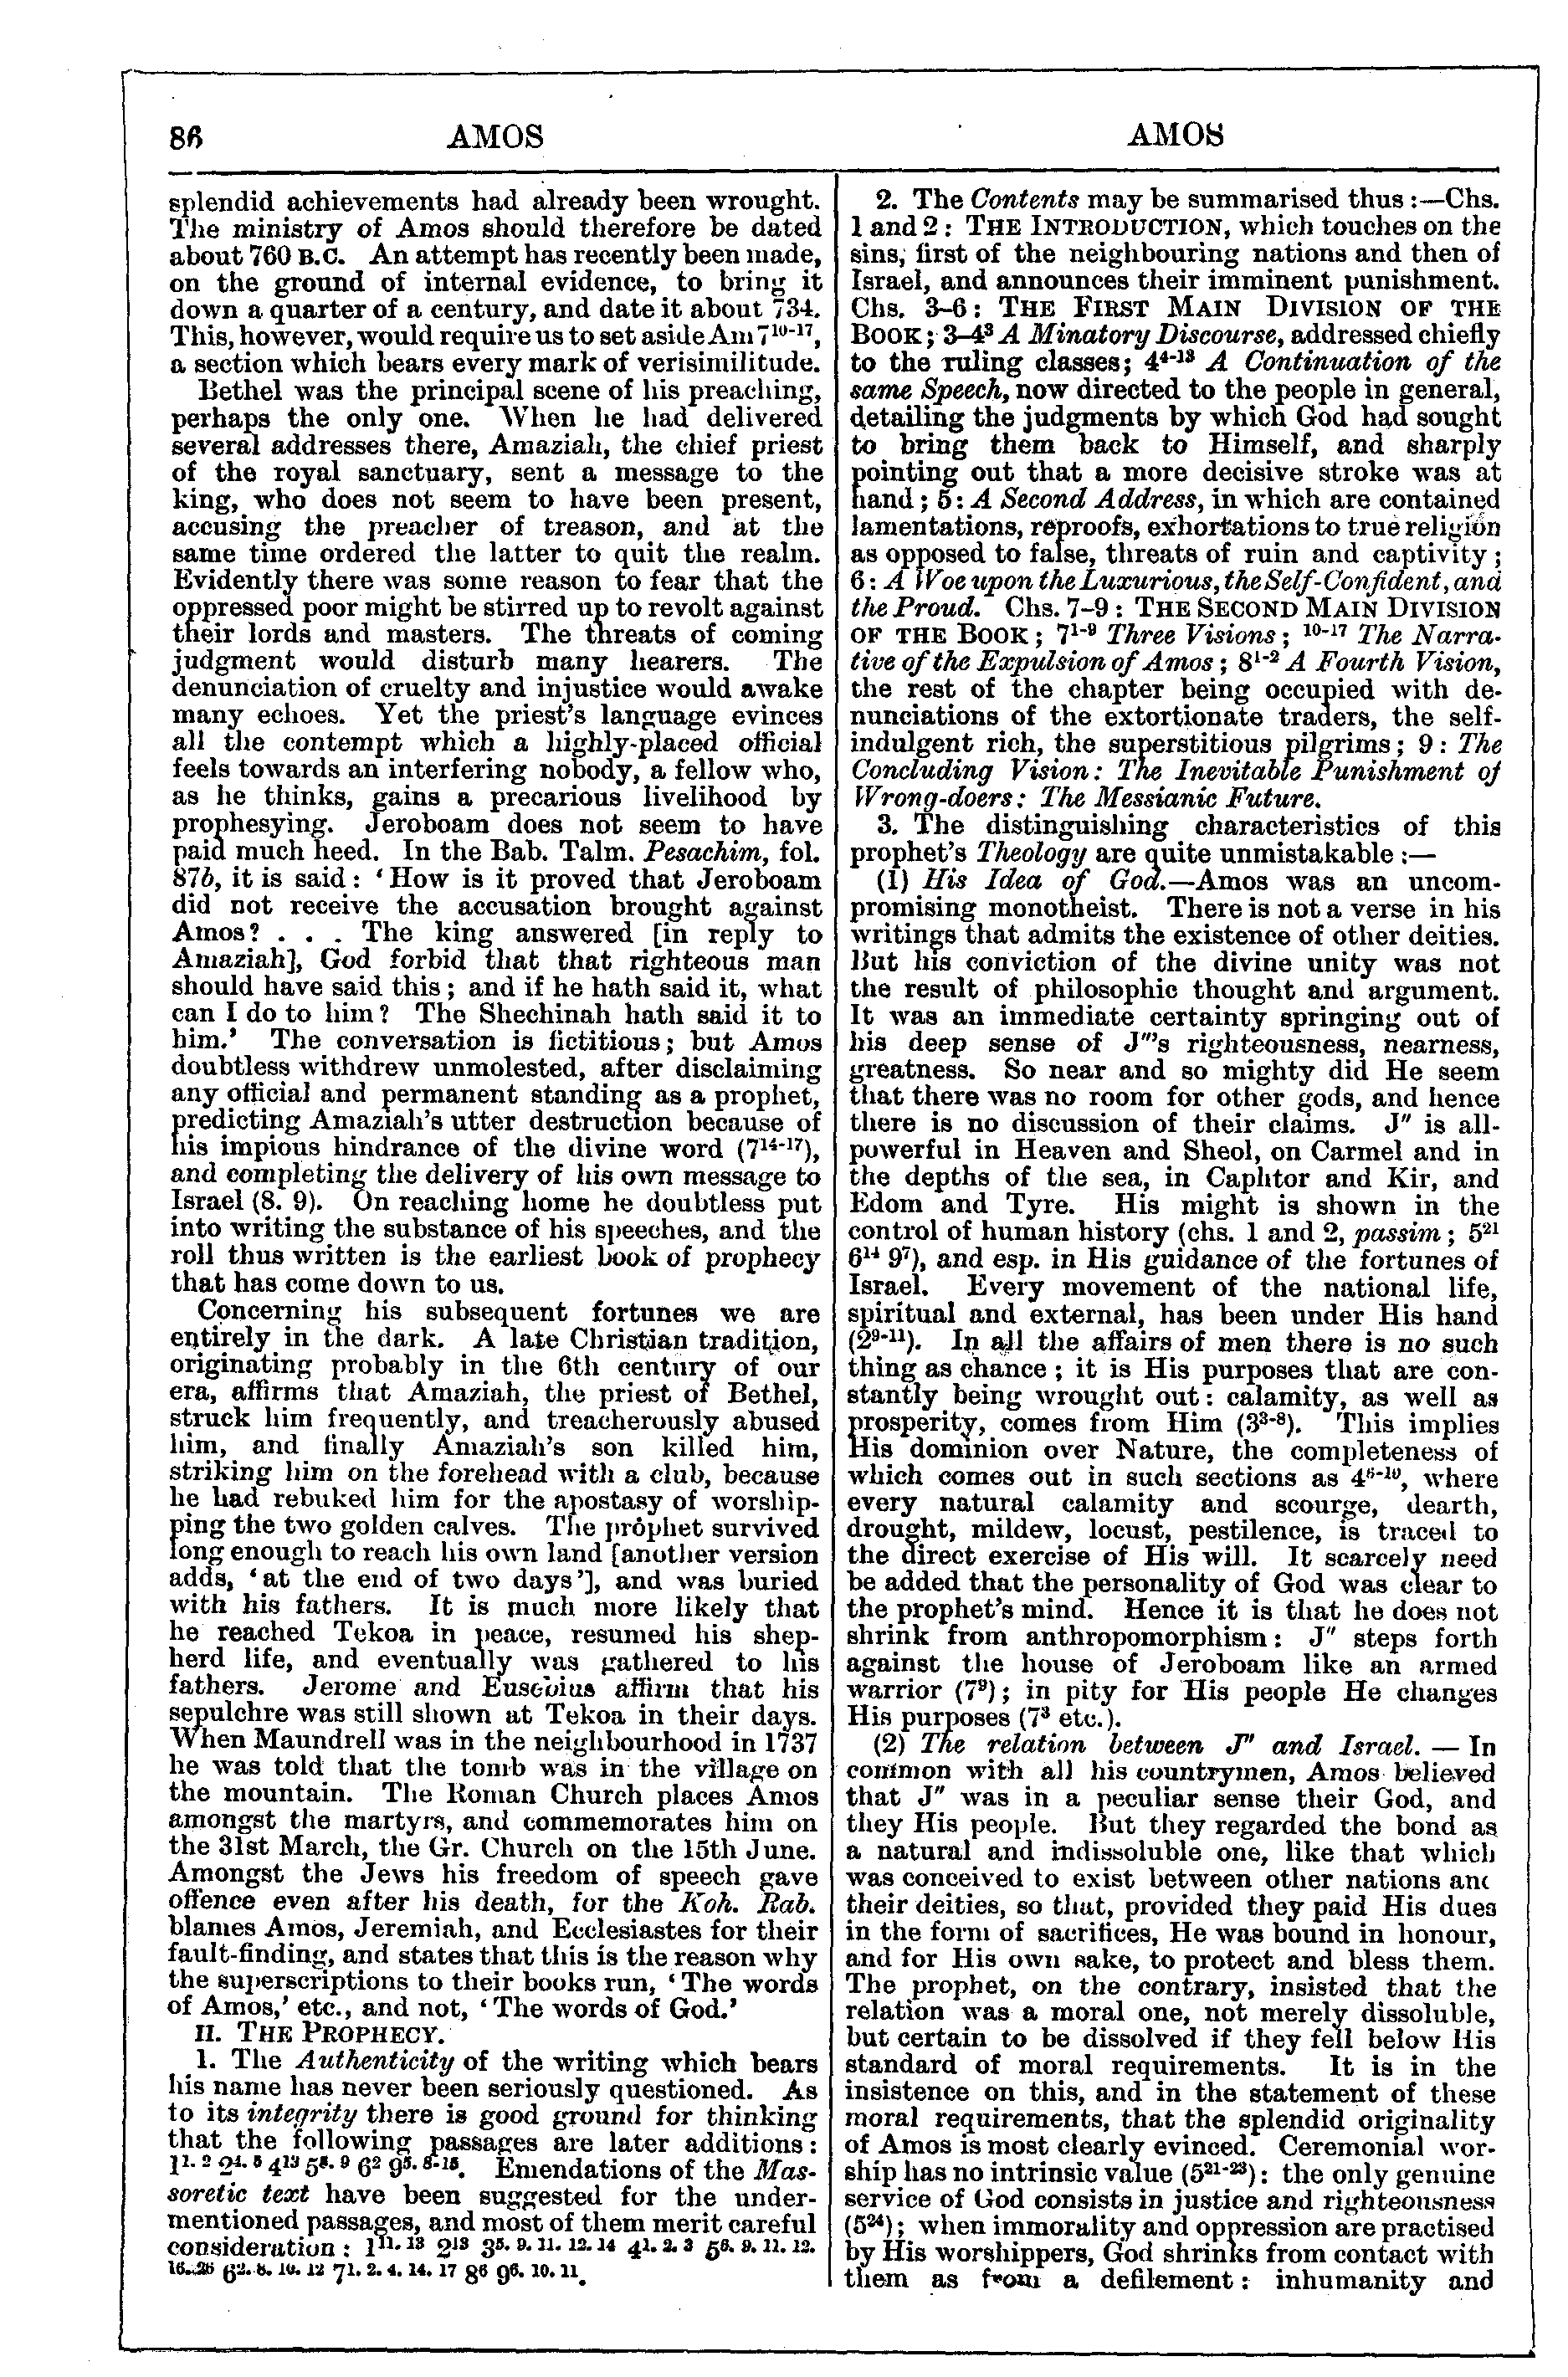 Image of page 86